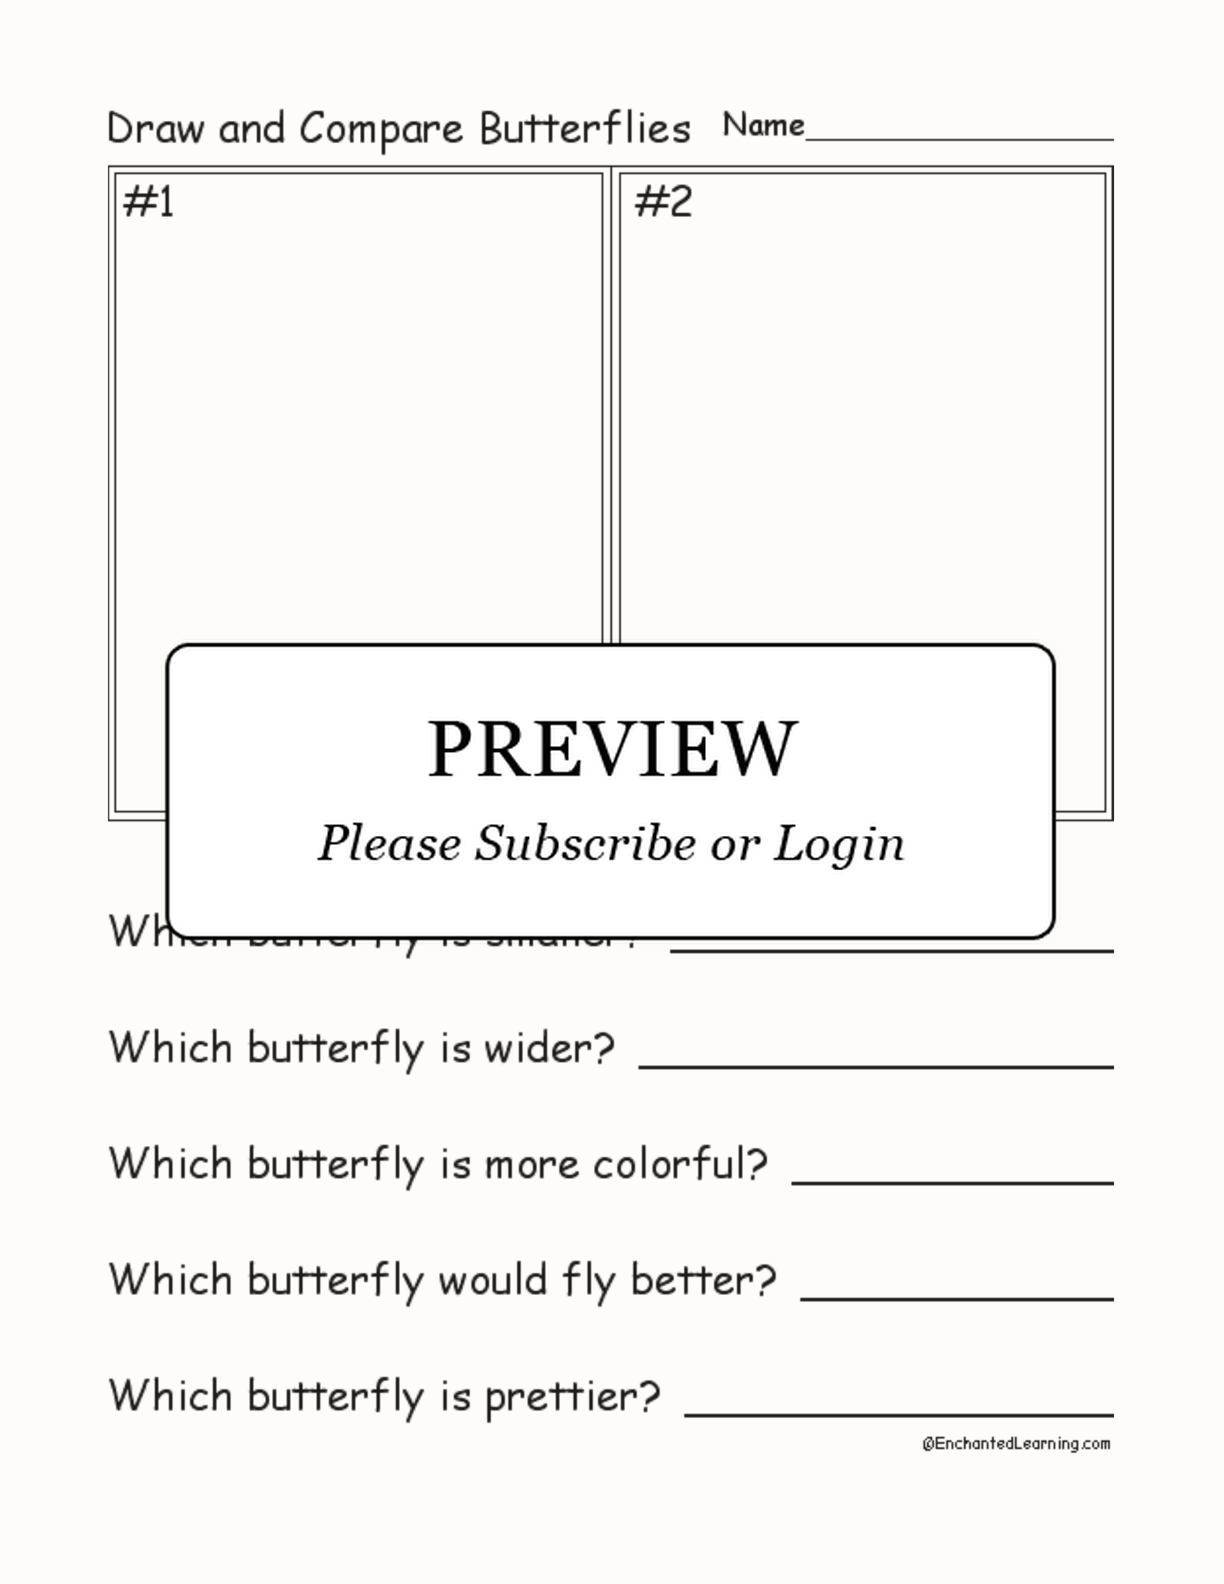 Draw and Compare Butterflies interactive worksheet page 1